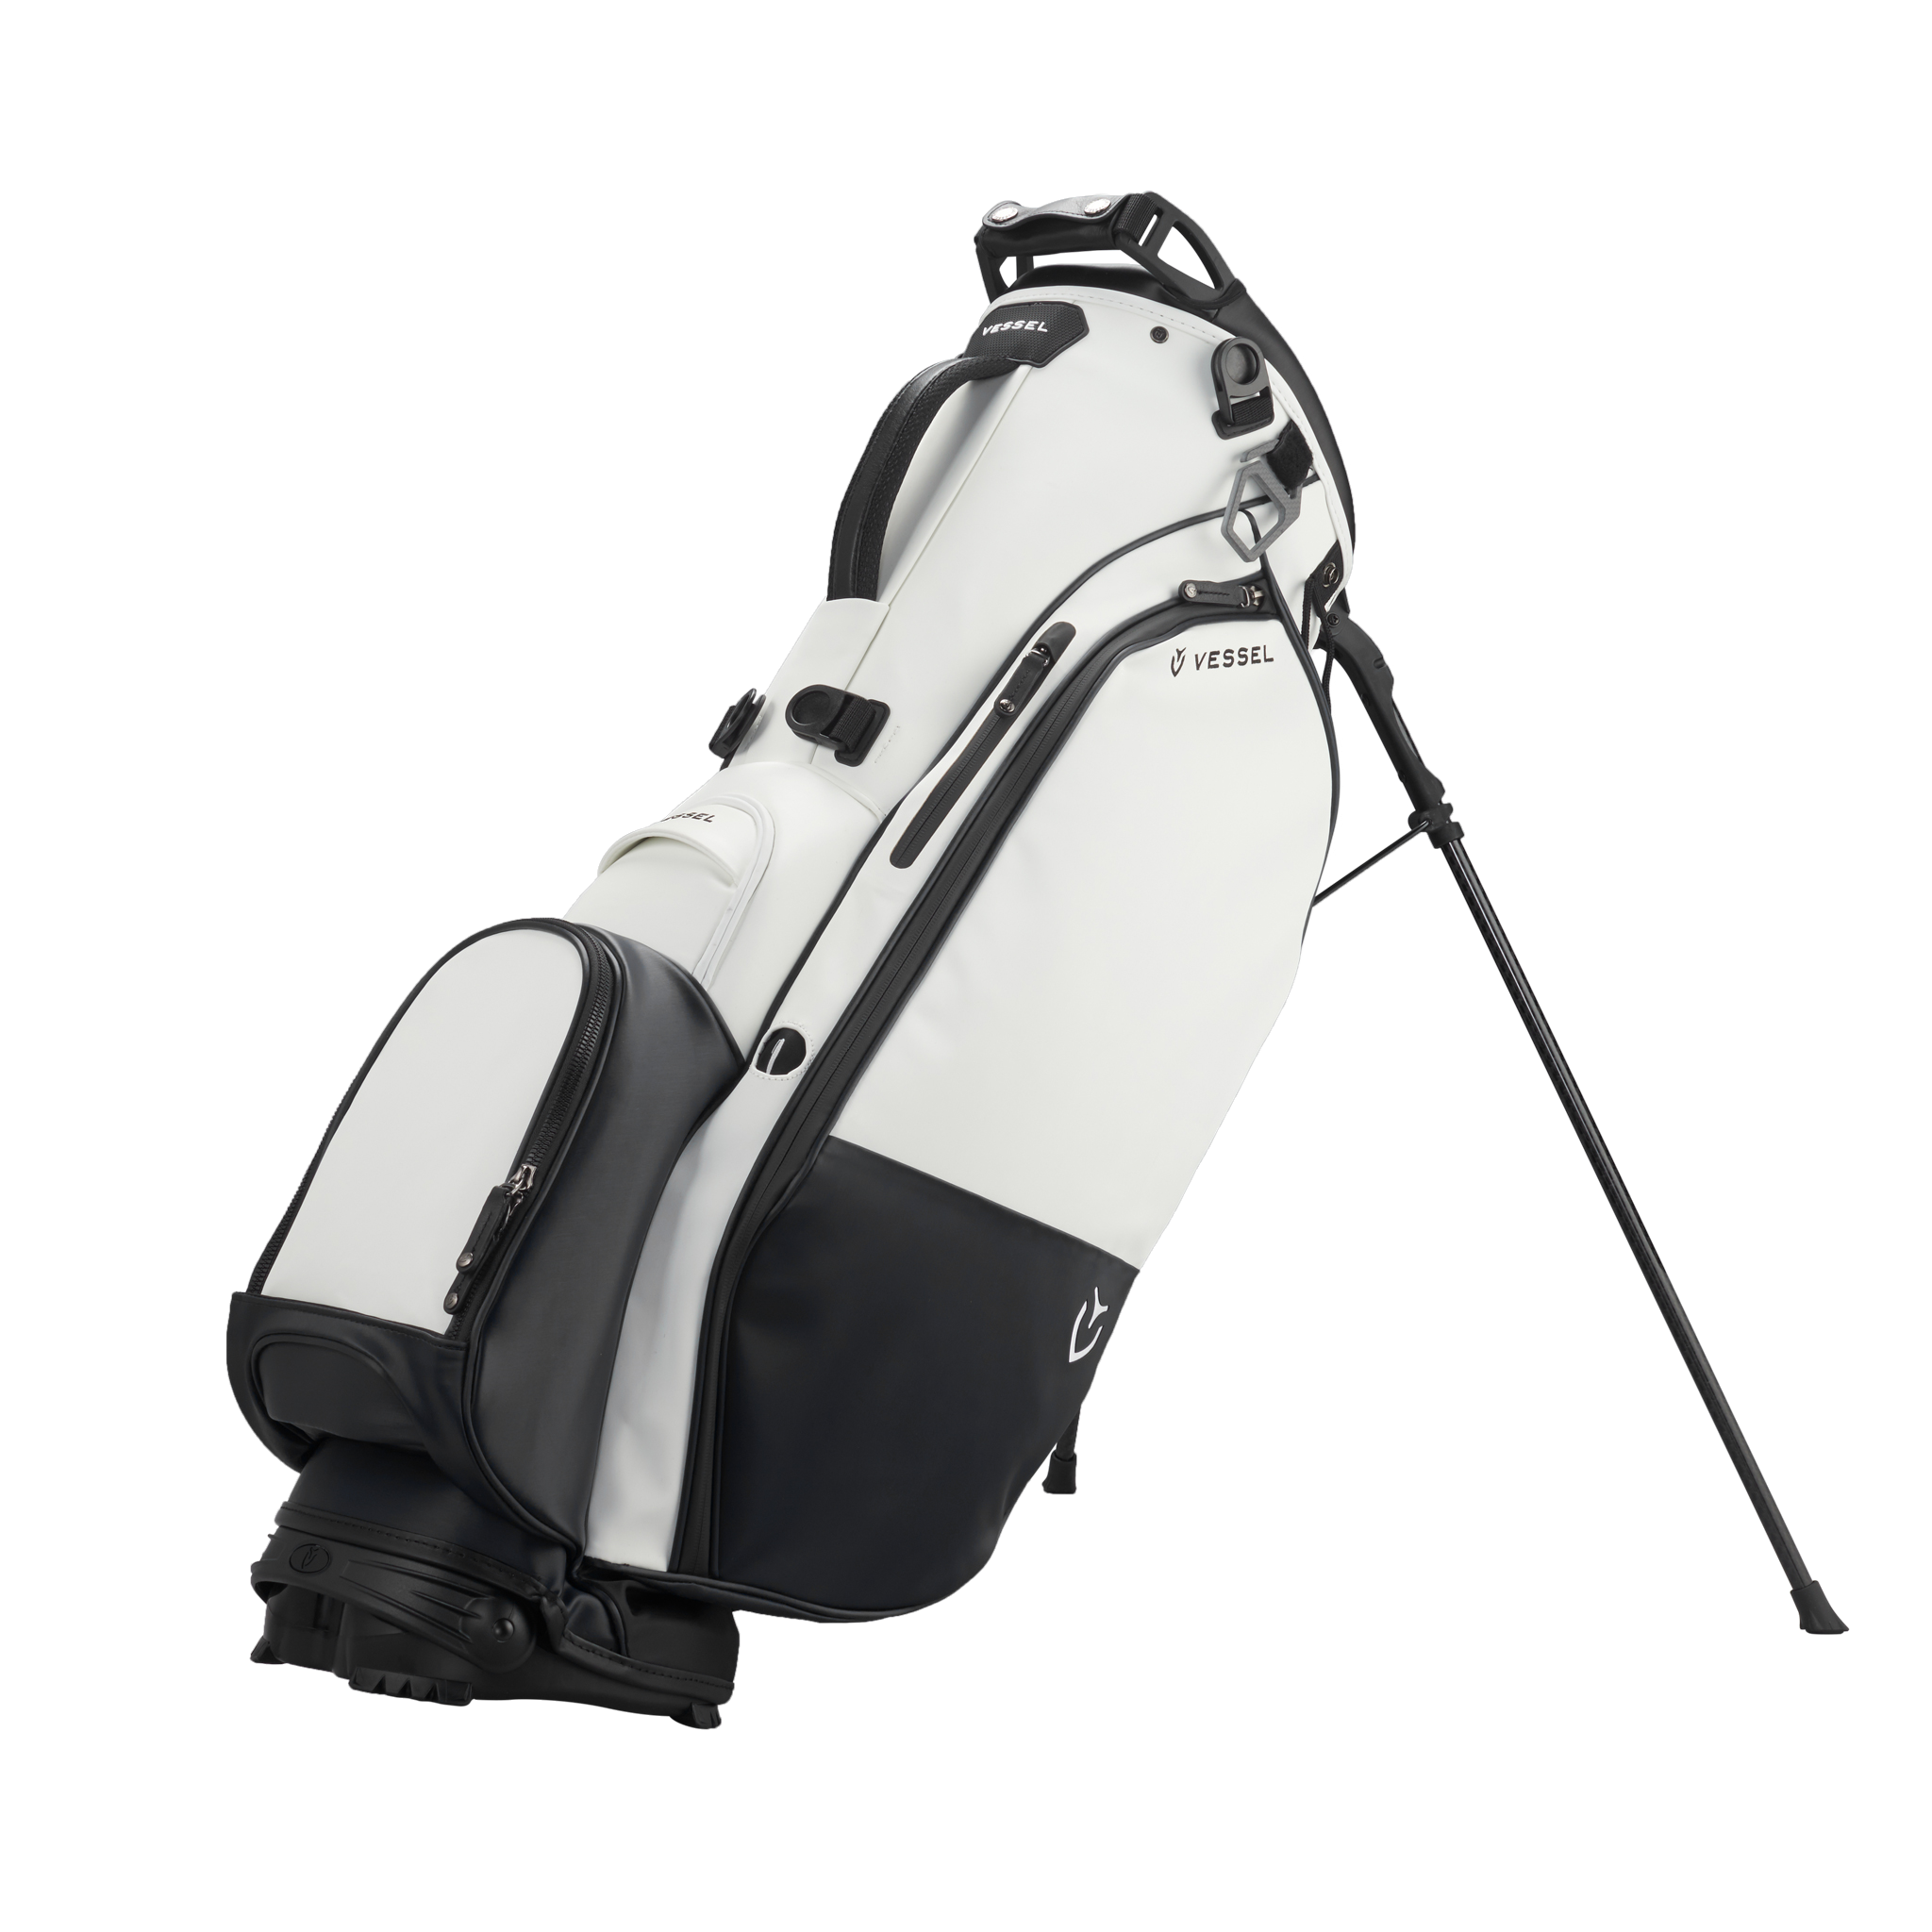 Player 2.0 Stand Bag - 14 Way, VESSEL, Golf Bags, Men's, WHITE/BLACK